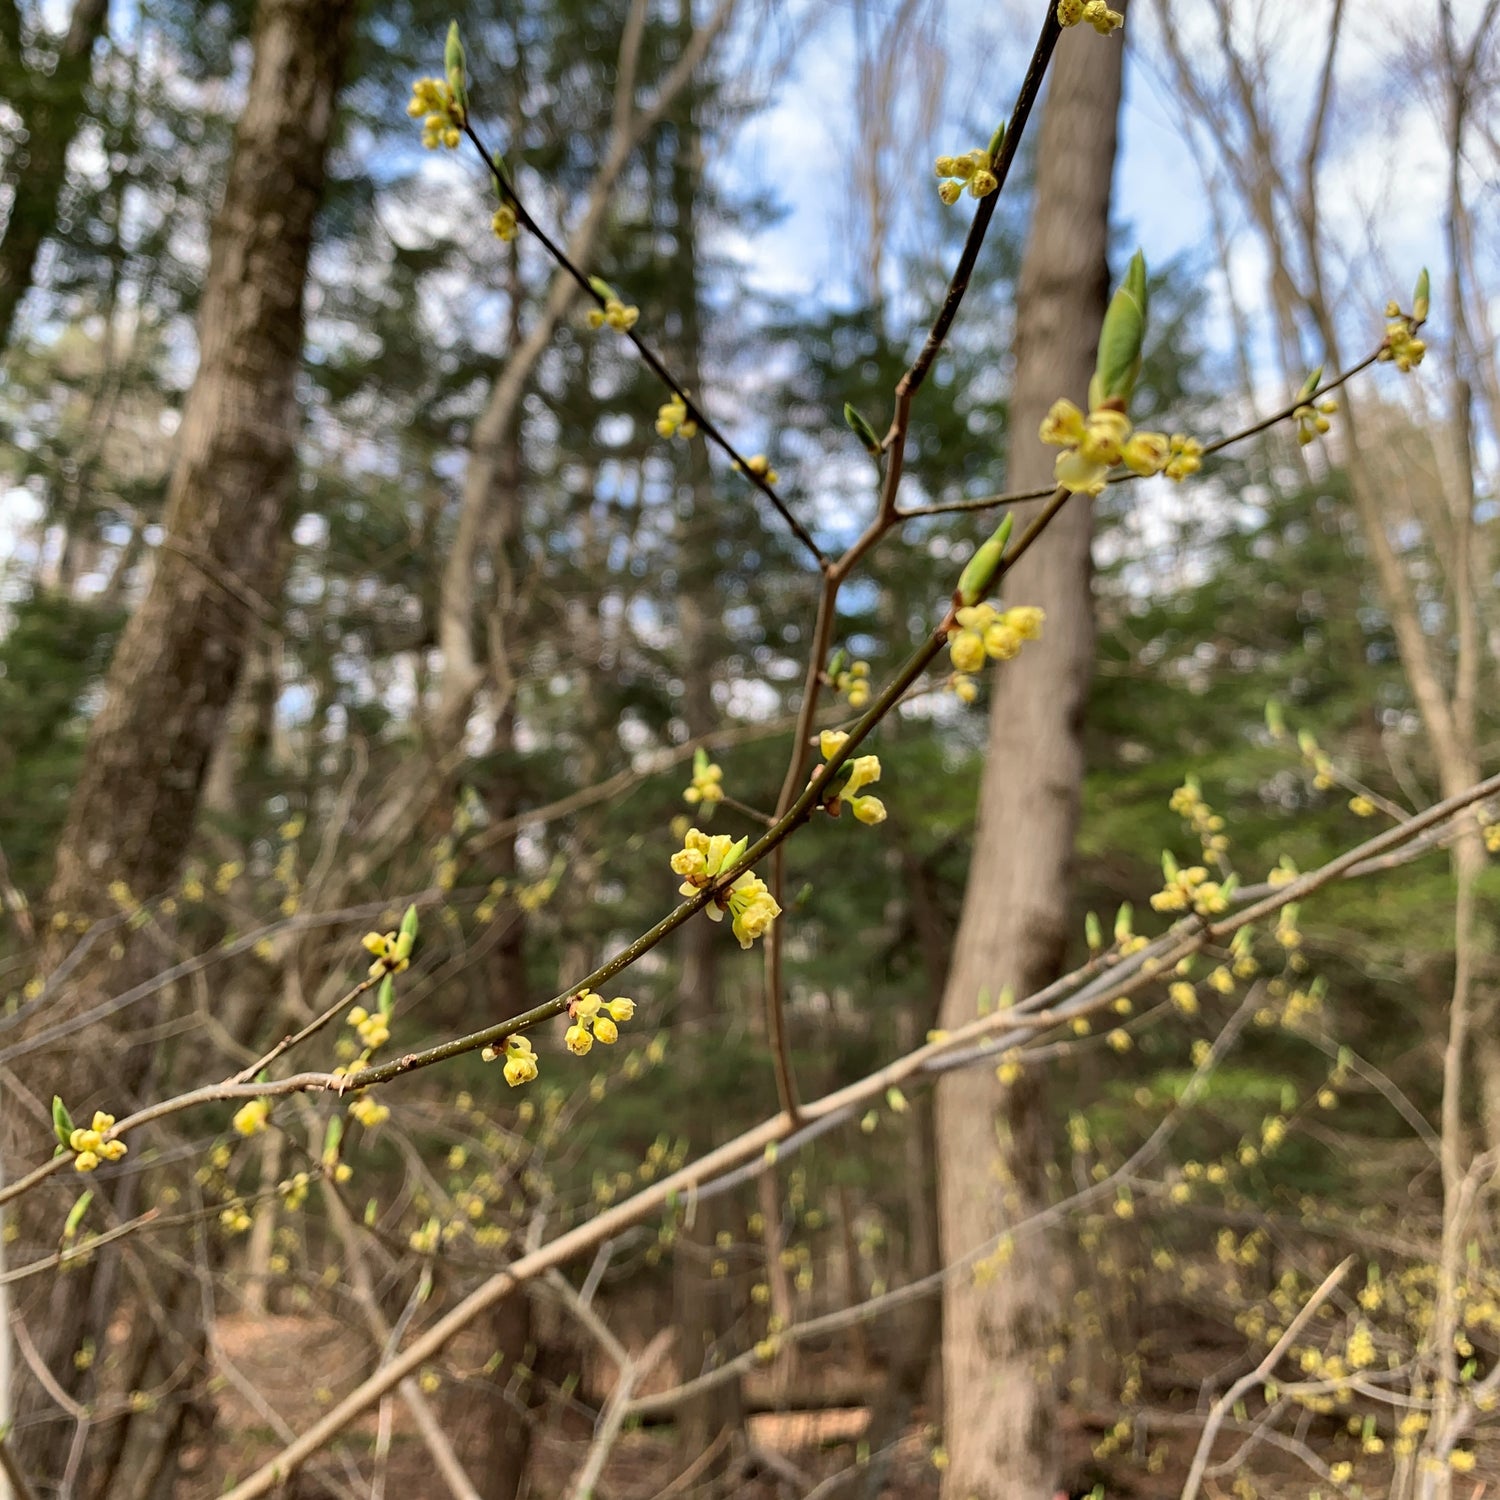 Spicebush is a North American native shrub with tiny yellow flowers in early spring.